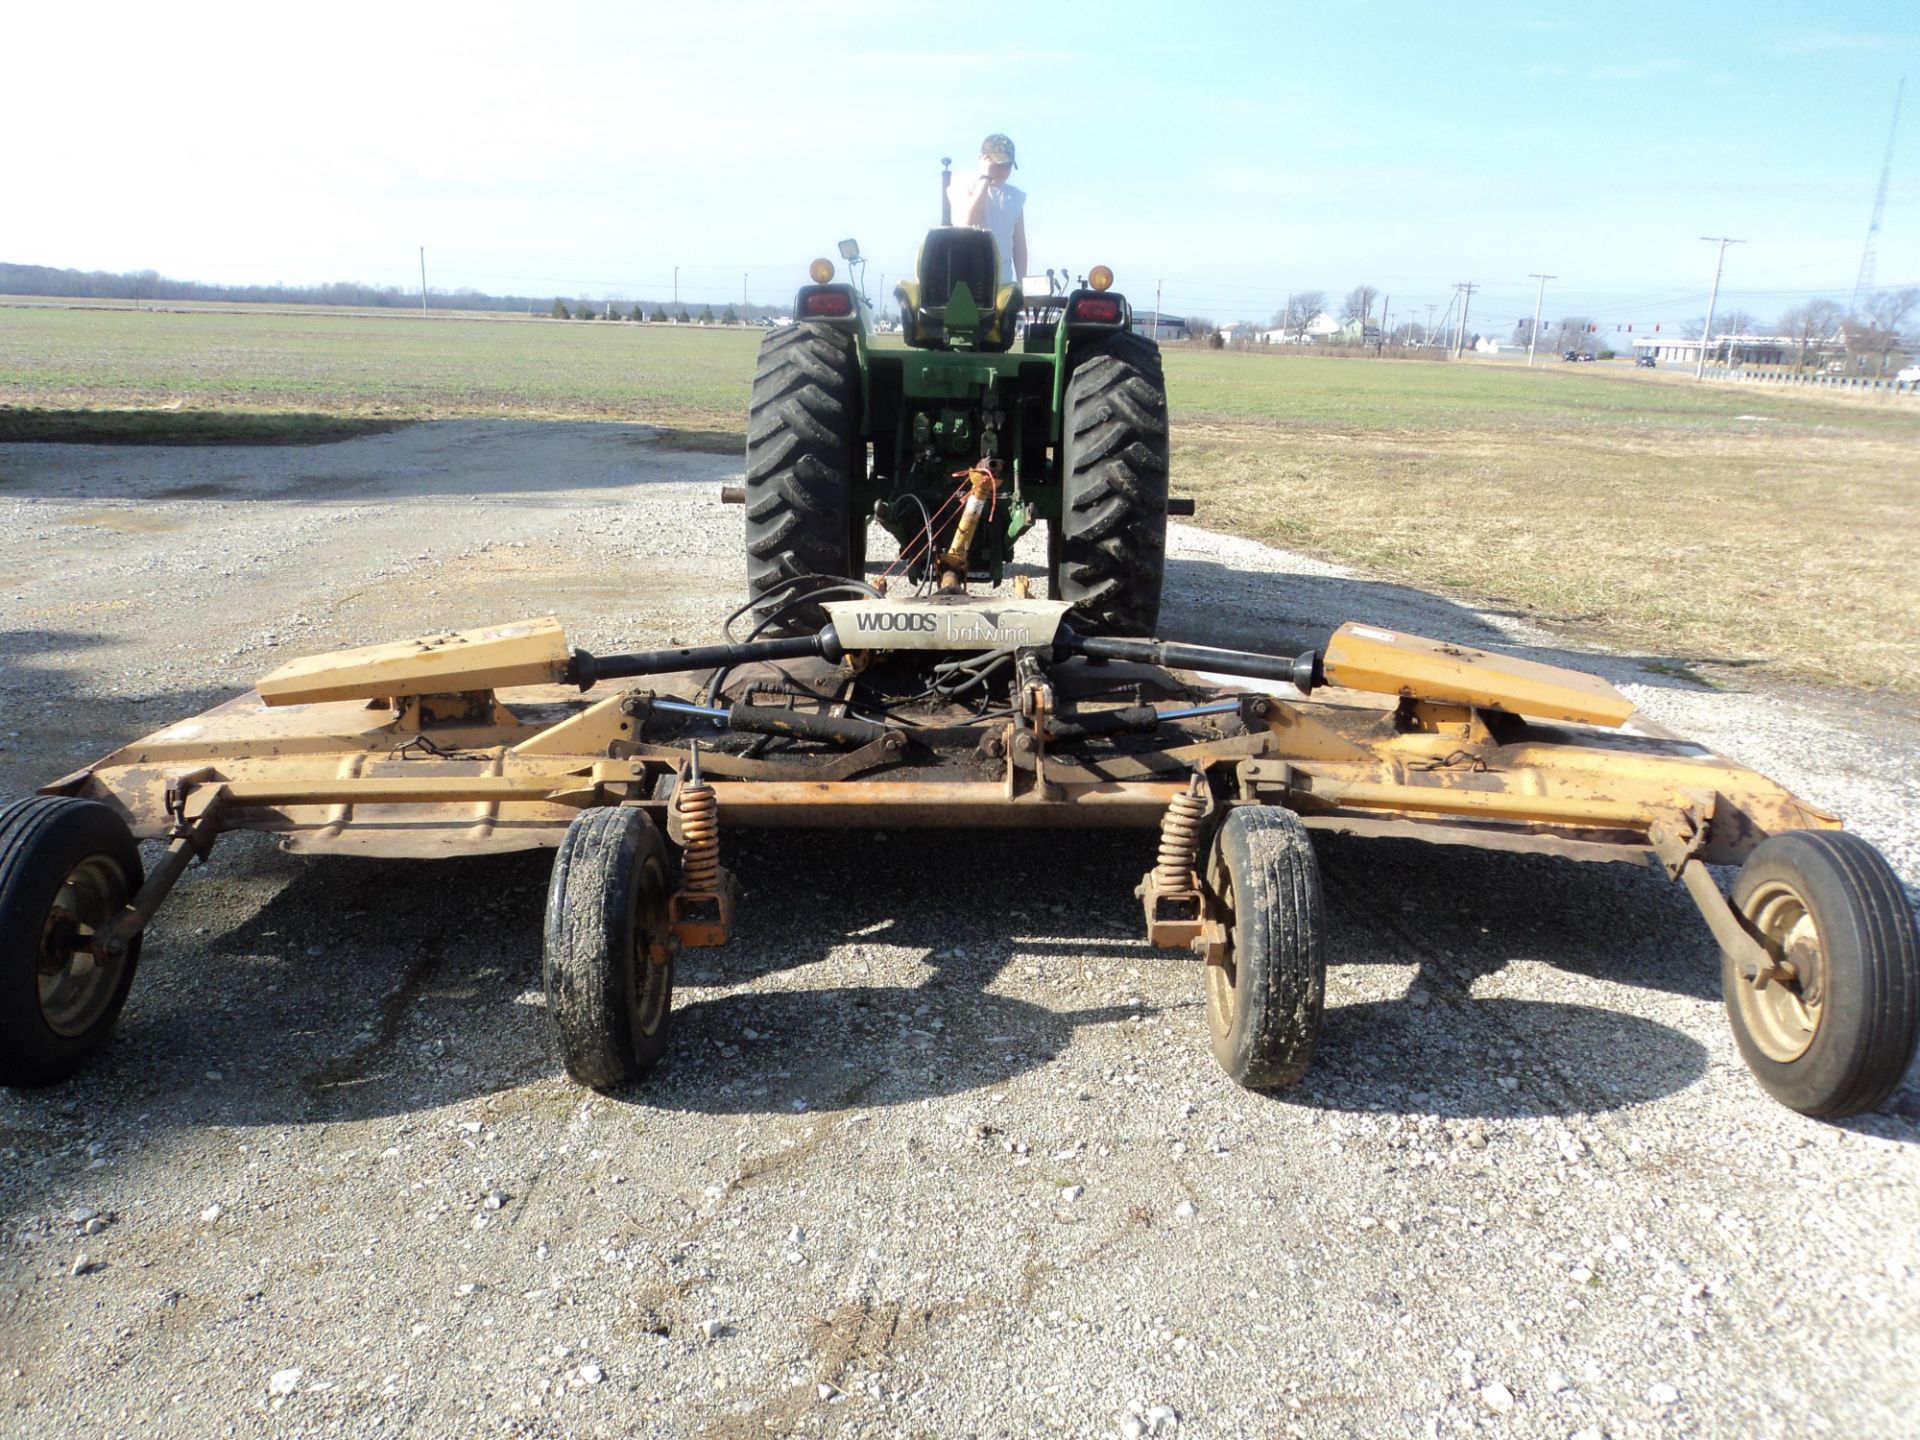 15' Woods HD 315 Batwing rotary mower, hyd fold, hyd lift, aircraft tires